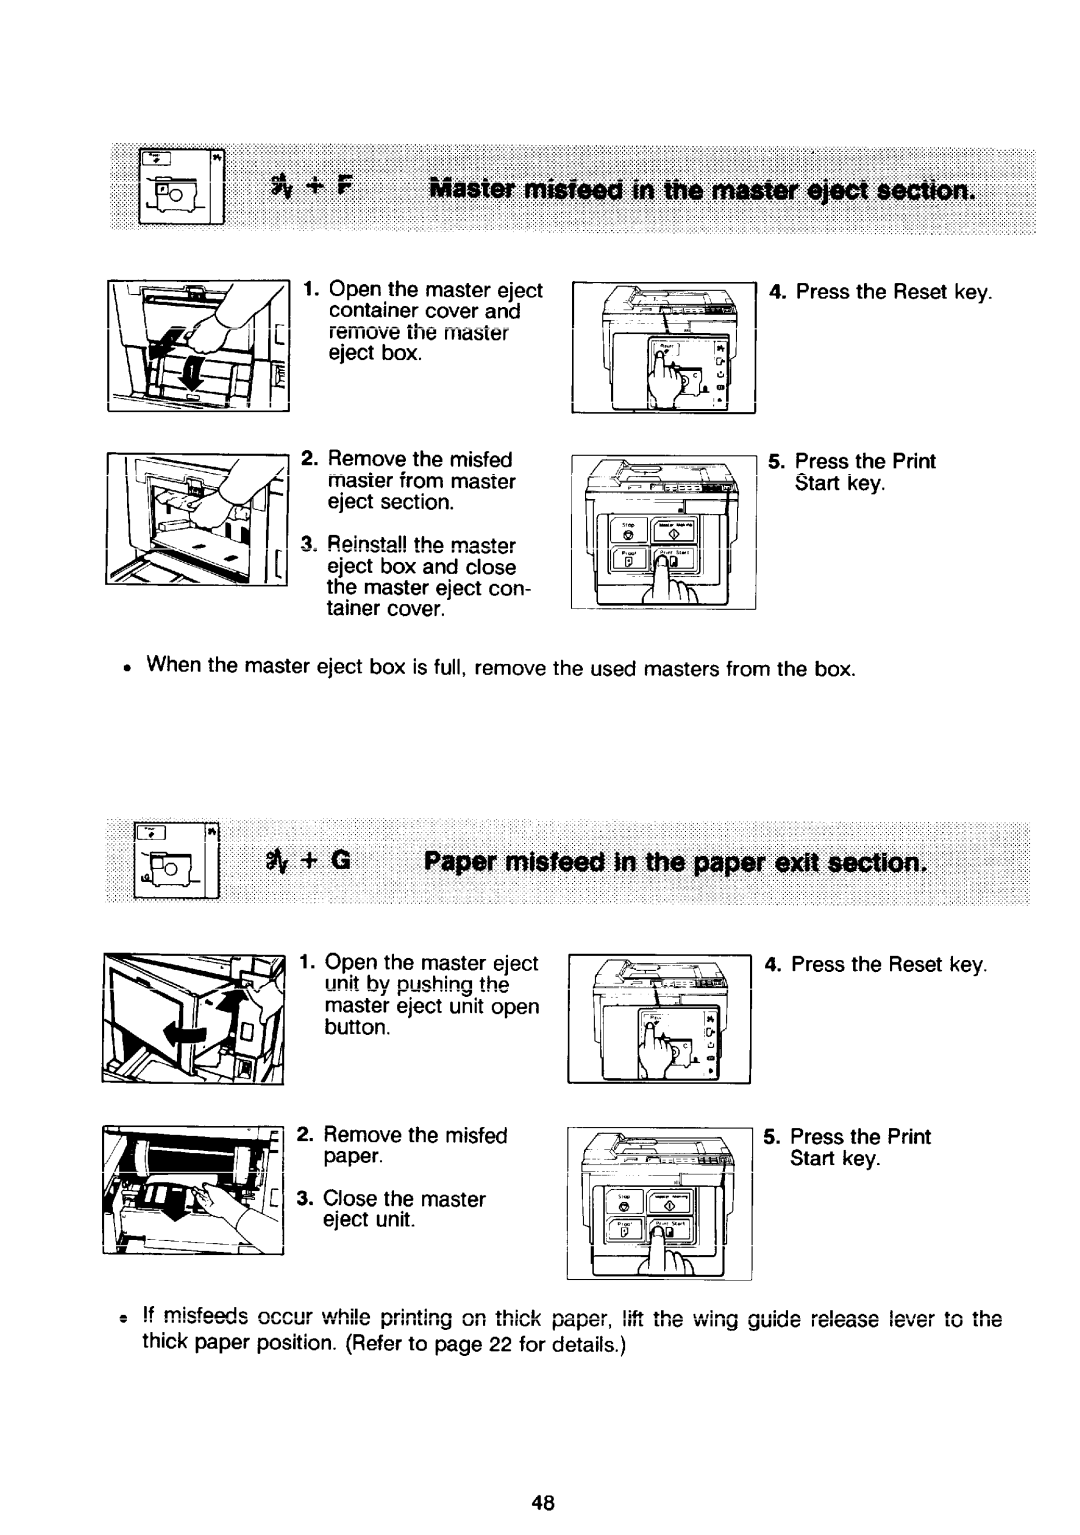 Ricoh PRIPORT VT2130 manual Remove the misfed master from master eject section 